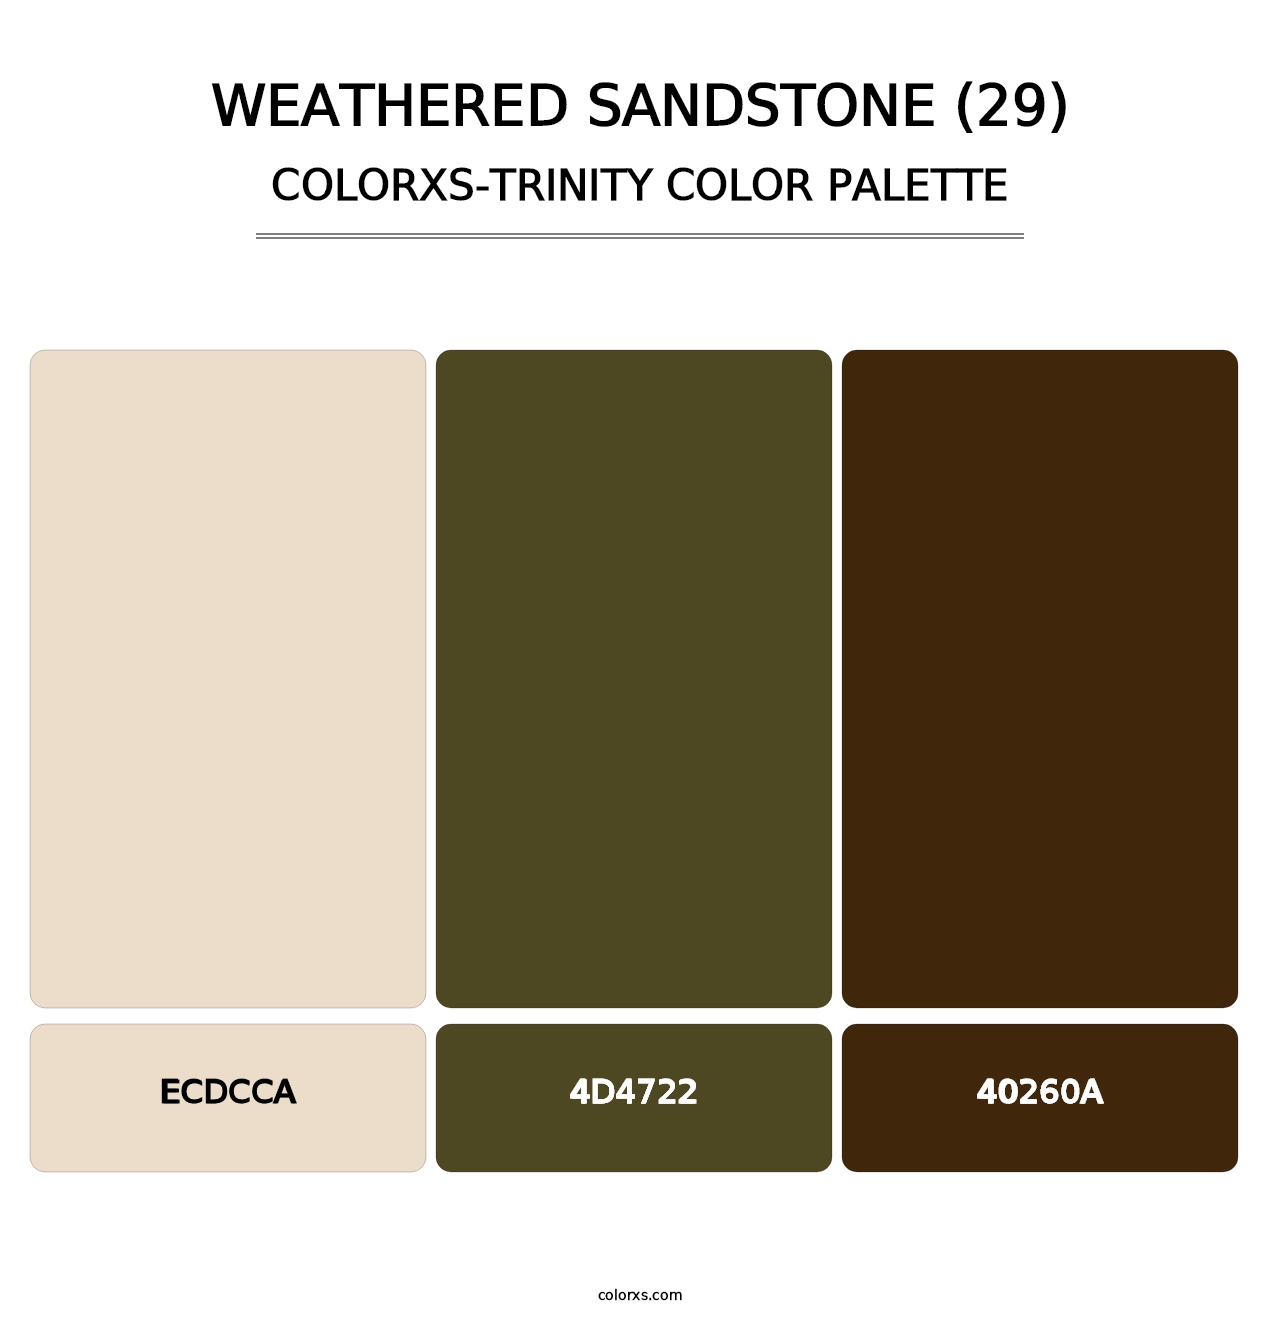 Weathered Sandstone (29) - Colorxs Trinity Palette